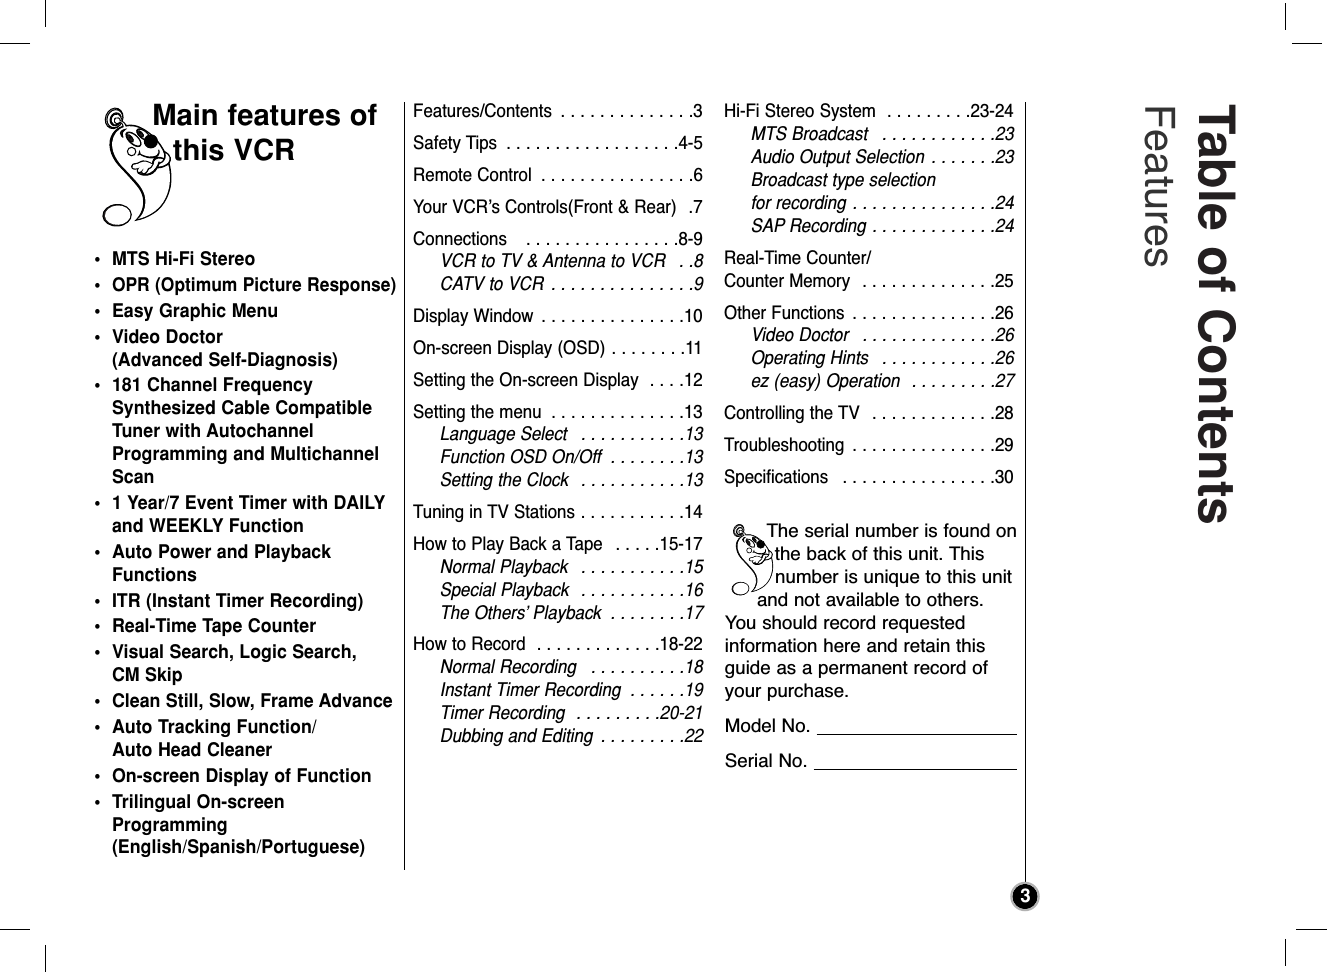 Table of Contents Features3• MTS Hi-Fi Stereo•OPR (Optimum Picture Response)• Easy Graphic Menu• Video Doctor (Advanced Self-Diagnosis)• 181 Channel FrequencySynthesized Cable CompatibleTuner with AutochannelProgramming and MultichannelScan• 1 Year/7 Event Timer with DAILYand WEEKLY Function• Auto Power and PlaybackFunctions• ITR (Instant Timer Recording)• Real-Time Tape Counter• Visual Search, Logic Search, CM Skip• Clean Still, Slow, Frame Advance• Auto Tracking Function/Auto Head Cleaner• On-screen Display of Function• Trilingual On-screenProgramming(English/Spanish/Portuguese)Features/Contents  . . . . . . . . . . . . . .3Safety Tips  . . . . . . . . . . . . . . . . . .4-5Remote Control  . . . . . . . . . . . . . . . .6Your VCR’s Controls(Front &amp; Rear)  .7Connections   . . . . . . . . . . . . . . . .8-9VCR to TV &amp; Antenna to VCR  . .8CATV to VCR  . . . . . . . . . . . . . . .9Display Window  . . . . . . . . . . . . . . .10On-screen Display (OSD) . . . . . . . .11Setting the On-screen Display  . . . .12Setting the menu  . . . . . . . . . . . . . .13Language Select  . . . . . . . . . . .13Function OSD On/Off  . . . . . . . .13Setting the Clock  . . . . . . . . . . .13Tuning in TV Stations . . . . . . . . . . .14How to Play Back a Tape  . . . . .15-17Normal Playback  . . . . . . . . . . .15Special Playback  . . . . . . . . . . .16The Others’ Playback  . . . . . . . .17How to Record  . . . . . . . . . . . . .18-22Normal Recording  . . . . . . . . . .18Instant Timer Recording  . . . . . .19Timer Recording  . . . . . . . . .20-21Dubbing and Editing  . . . . . . . . .22Hi-Fi Stereo System  . . . . . . . . .23-24MTS Broadcast  . . . . . . . . . . . .23Audio Output Selection  . . . . . . .23Broadcast type selection for recording . . . . . . . . . . . . . . .24SAP Recording . . . . . . . . . . . . .24Real-Time Counter/Counter Memory  . . . . . . . . . . . . . .25Other Functions  . . . . . . . . . . . . . . .26Video Doctor  . . . . . . . . . . . . . .26Operating Hints  . . . . . . . . . . . .26ez (easy) Operation  . . . . . . . . .27Controlling the TV  . . . . . . . . . . . . .28Troubleshooting  . . . . . . . . . . . . . . .29Specifications  . . . . . . . . . . . . . . . .30Main features ofthis VCRThe serial number is found onthe back of this unit. Thisnumber is unique to this unitand not available to others.You should record requested information here and retain thisguide as a permanent record ofyour purchase.Model No. Serial No. 